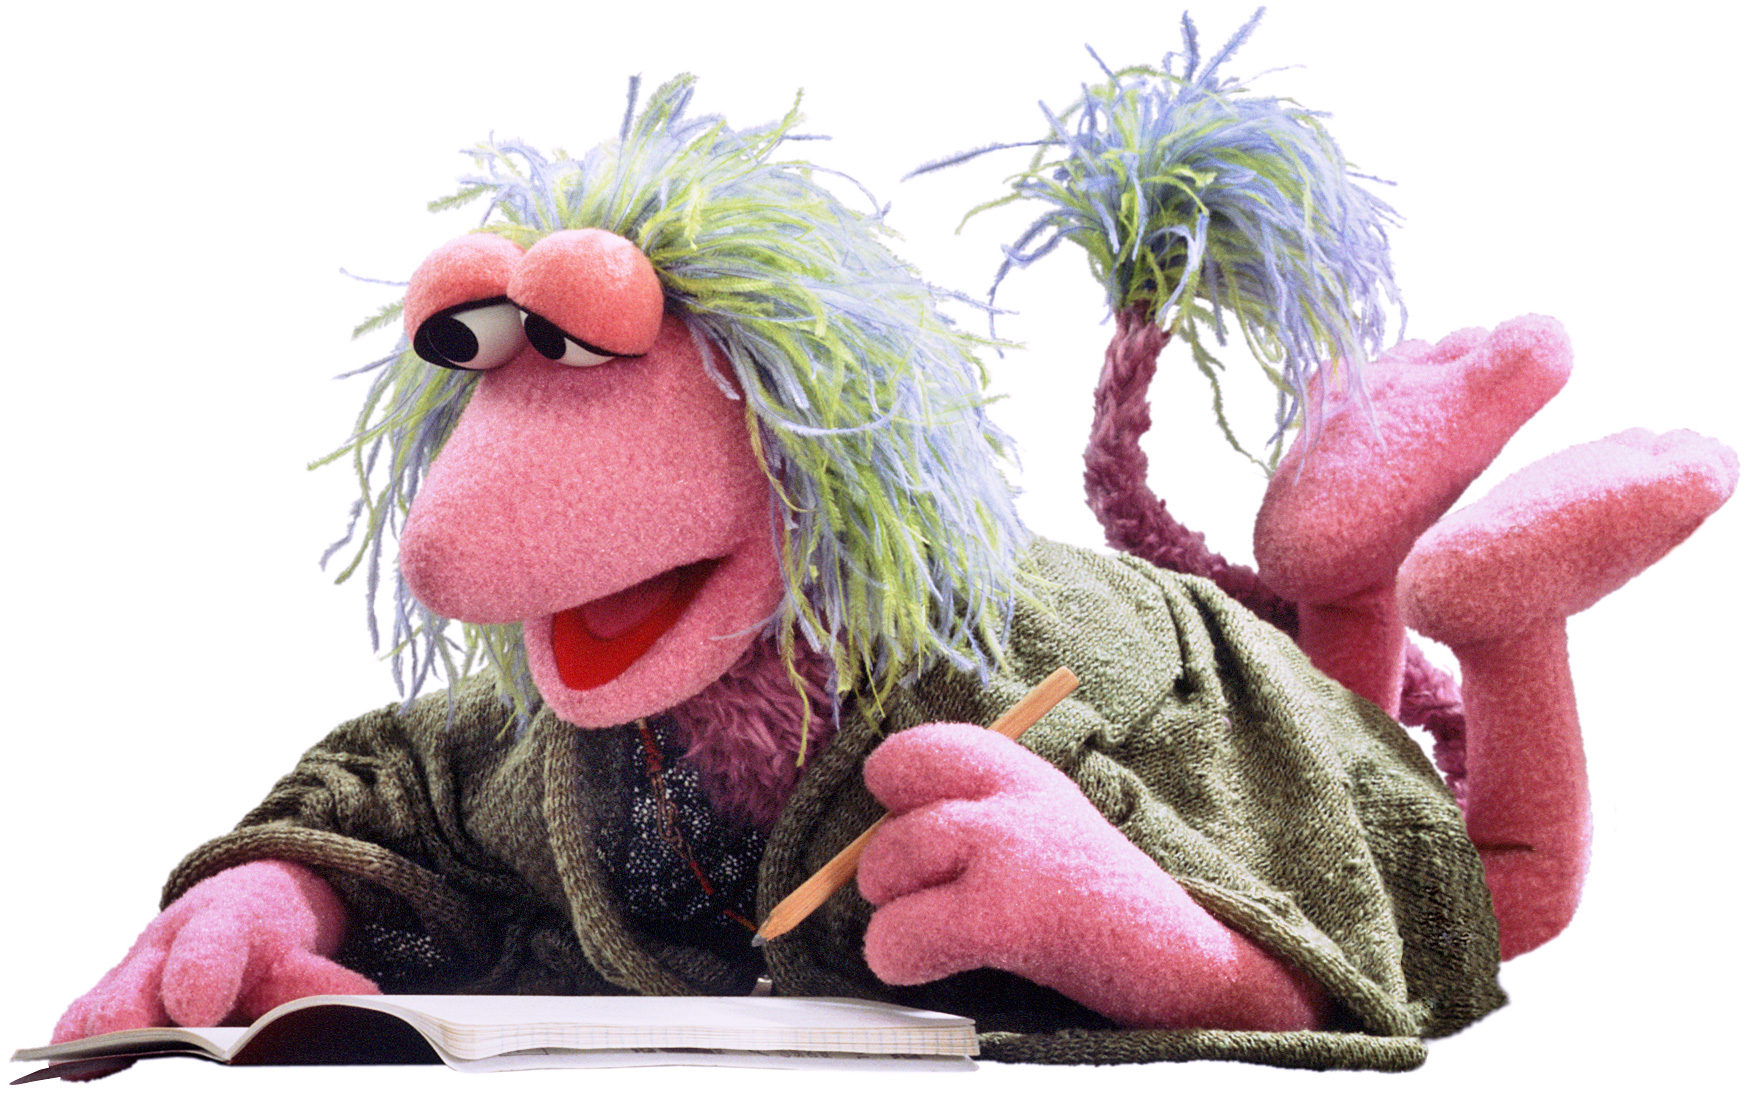 fraggle rock mokey and the minstrels